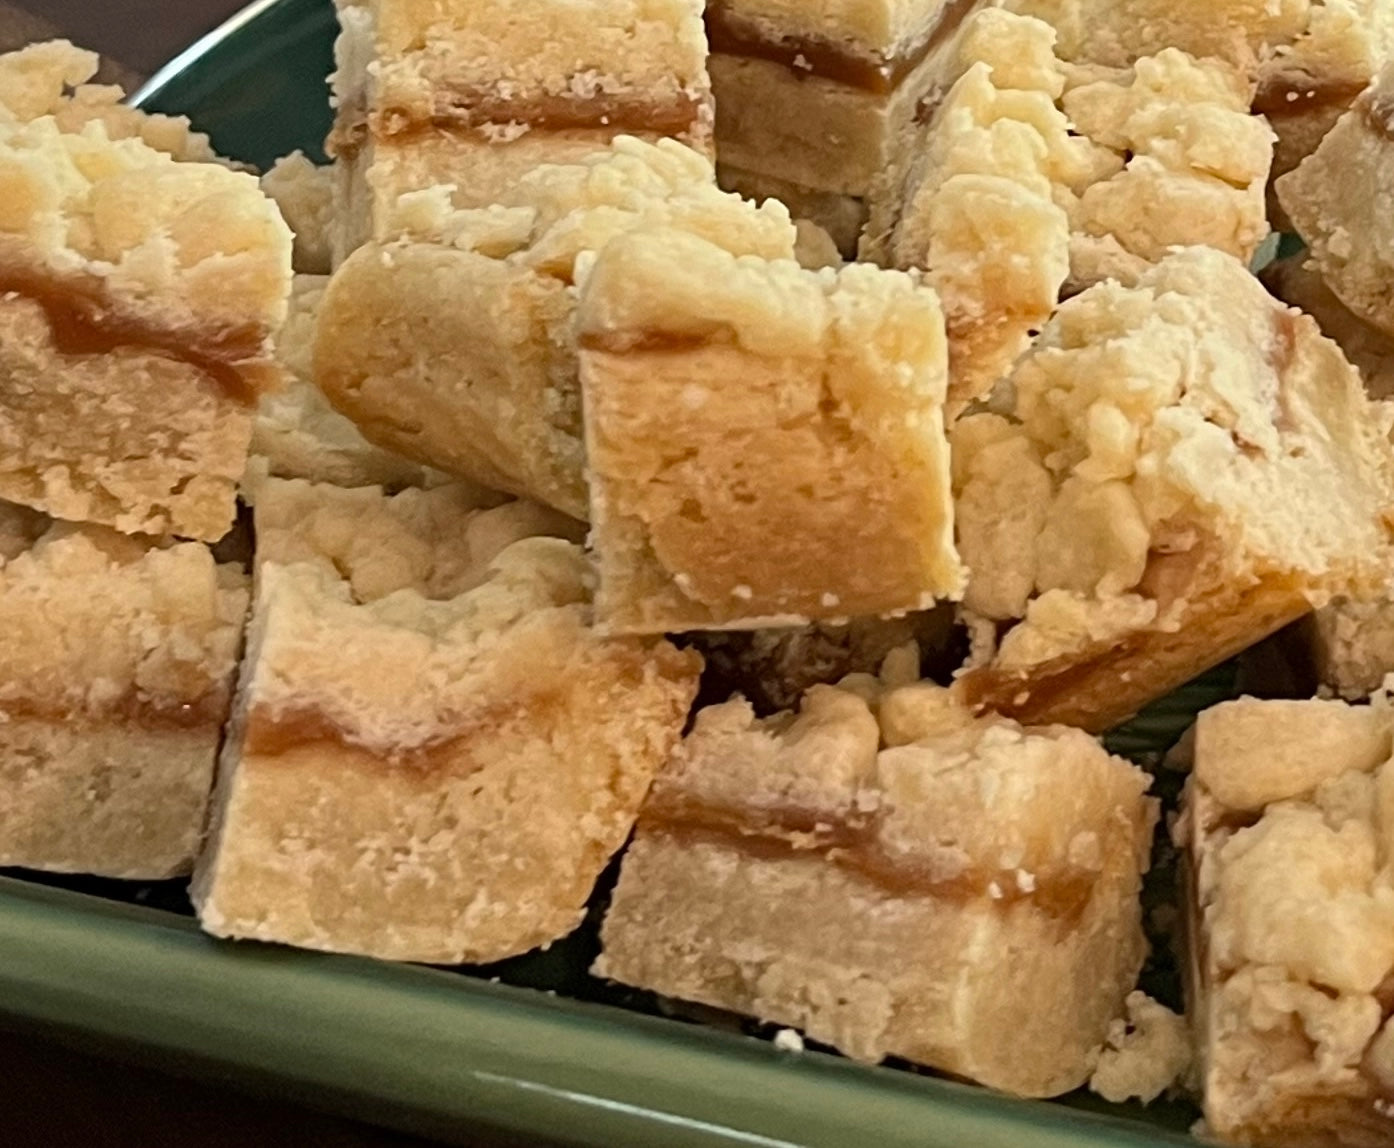 Salted Caramel Butter Bars (2 dozen) |  Contact us to arrange pick up. Please allow at least 2 business days for order processing.